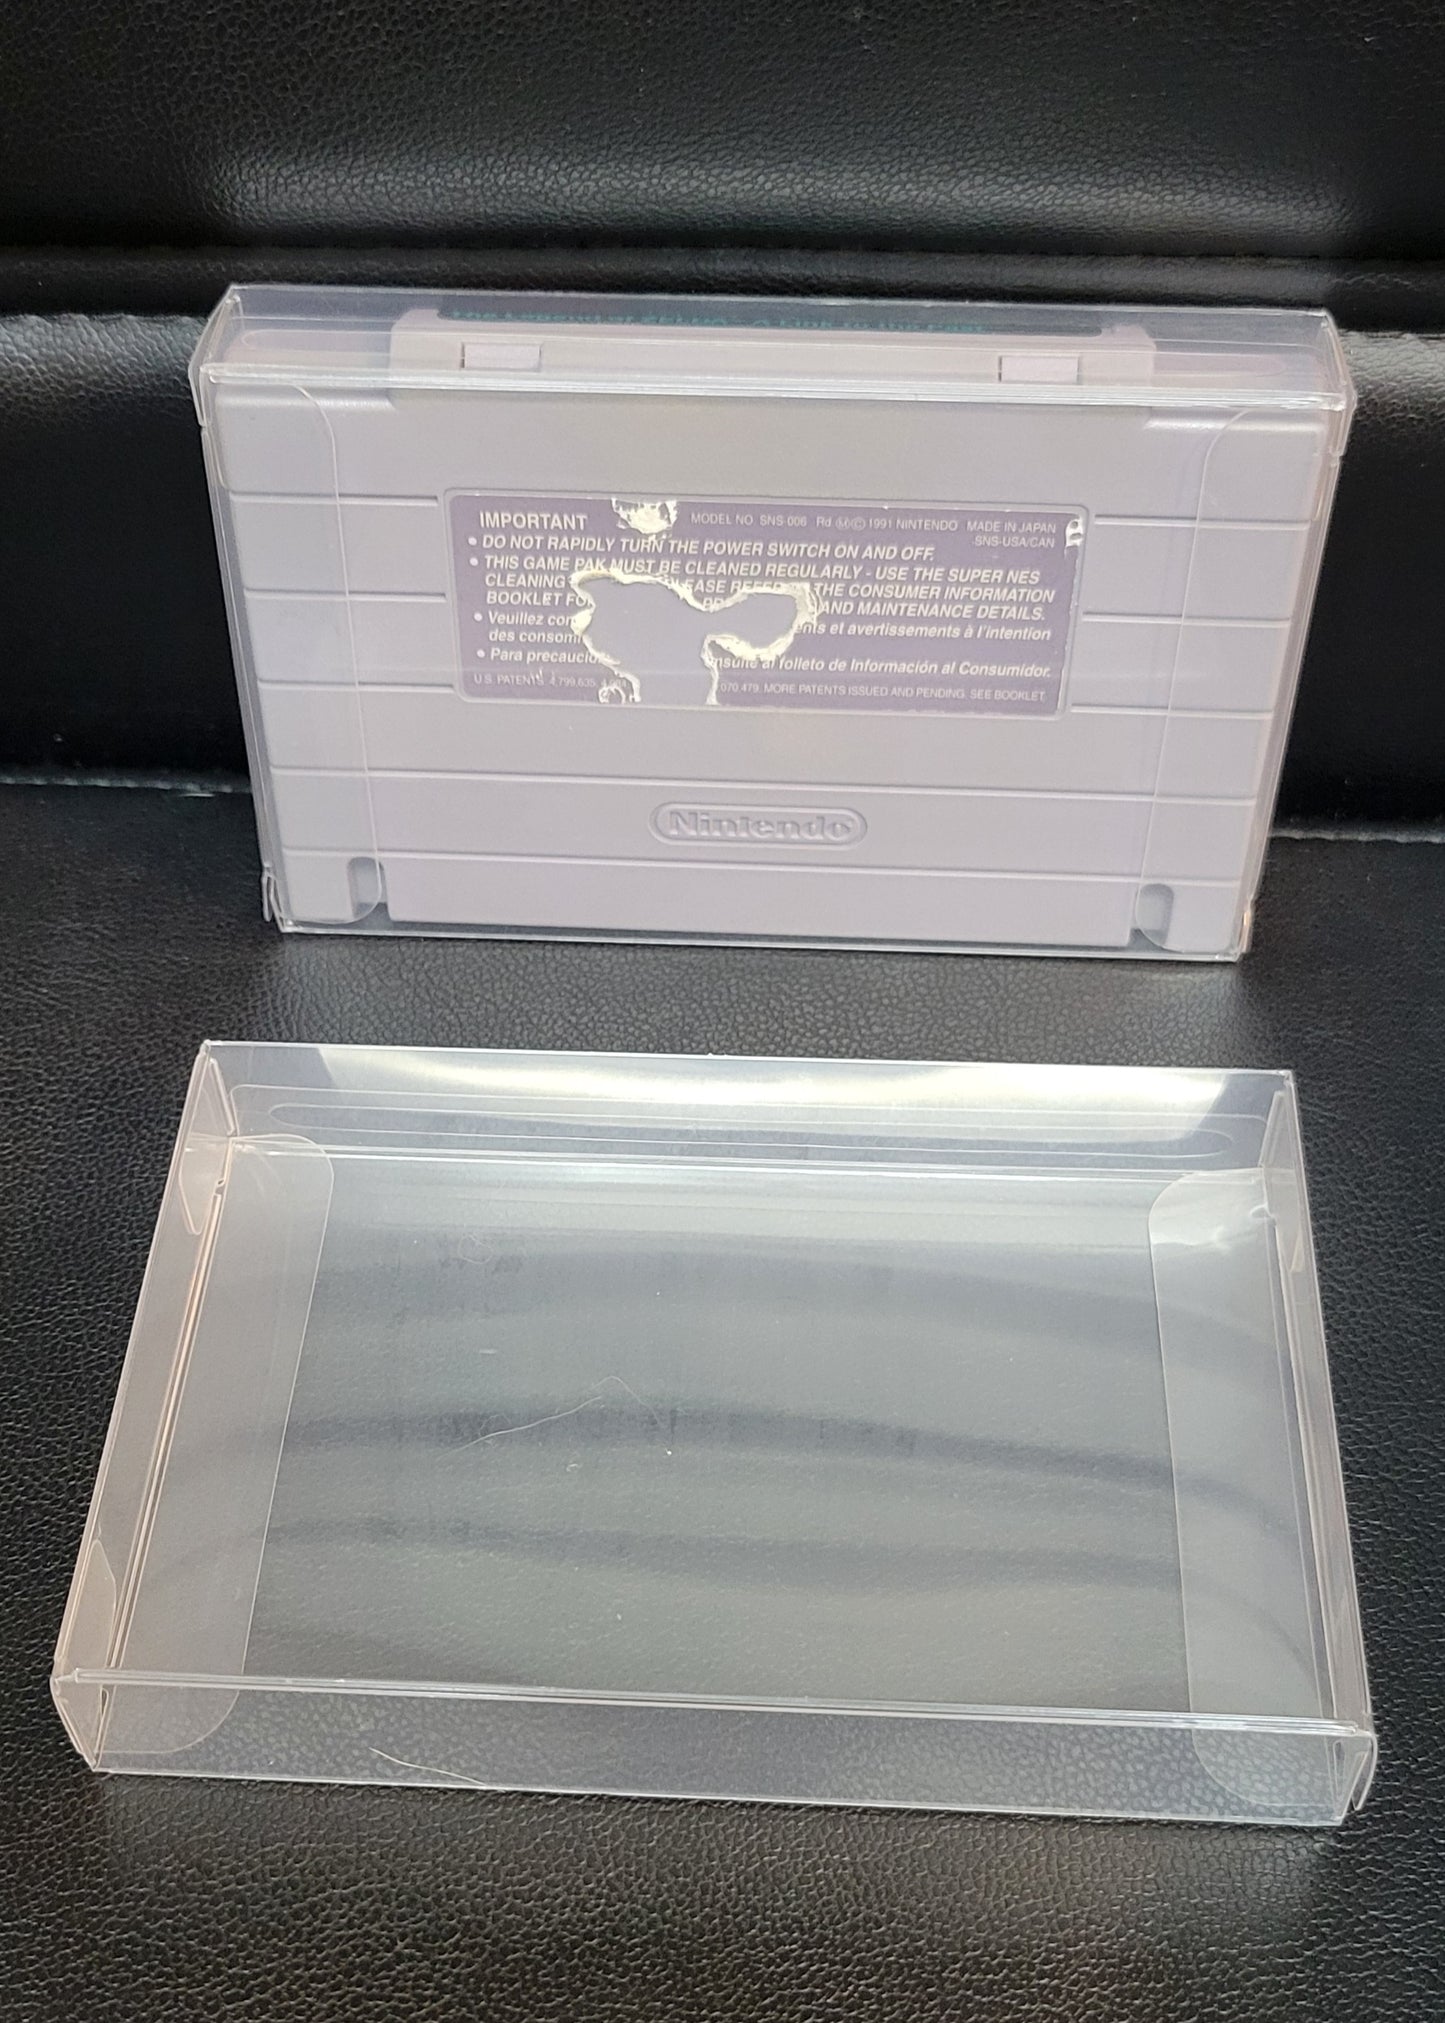 Legend Of Zelda A Link To The Past - AUTHENTIC - SNES - Super Nintendo Ent. System NTSC Cartridge + Protector